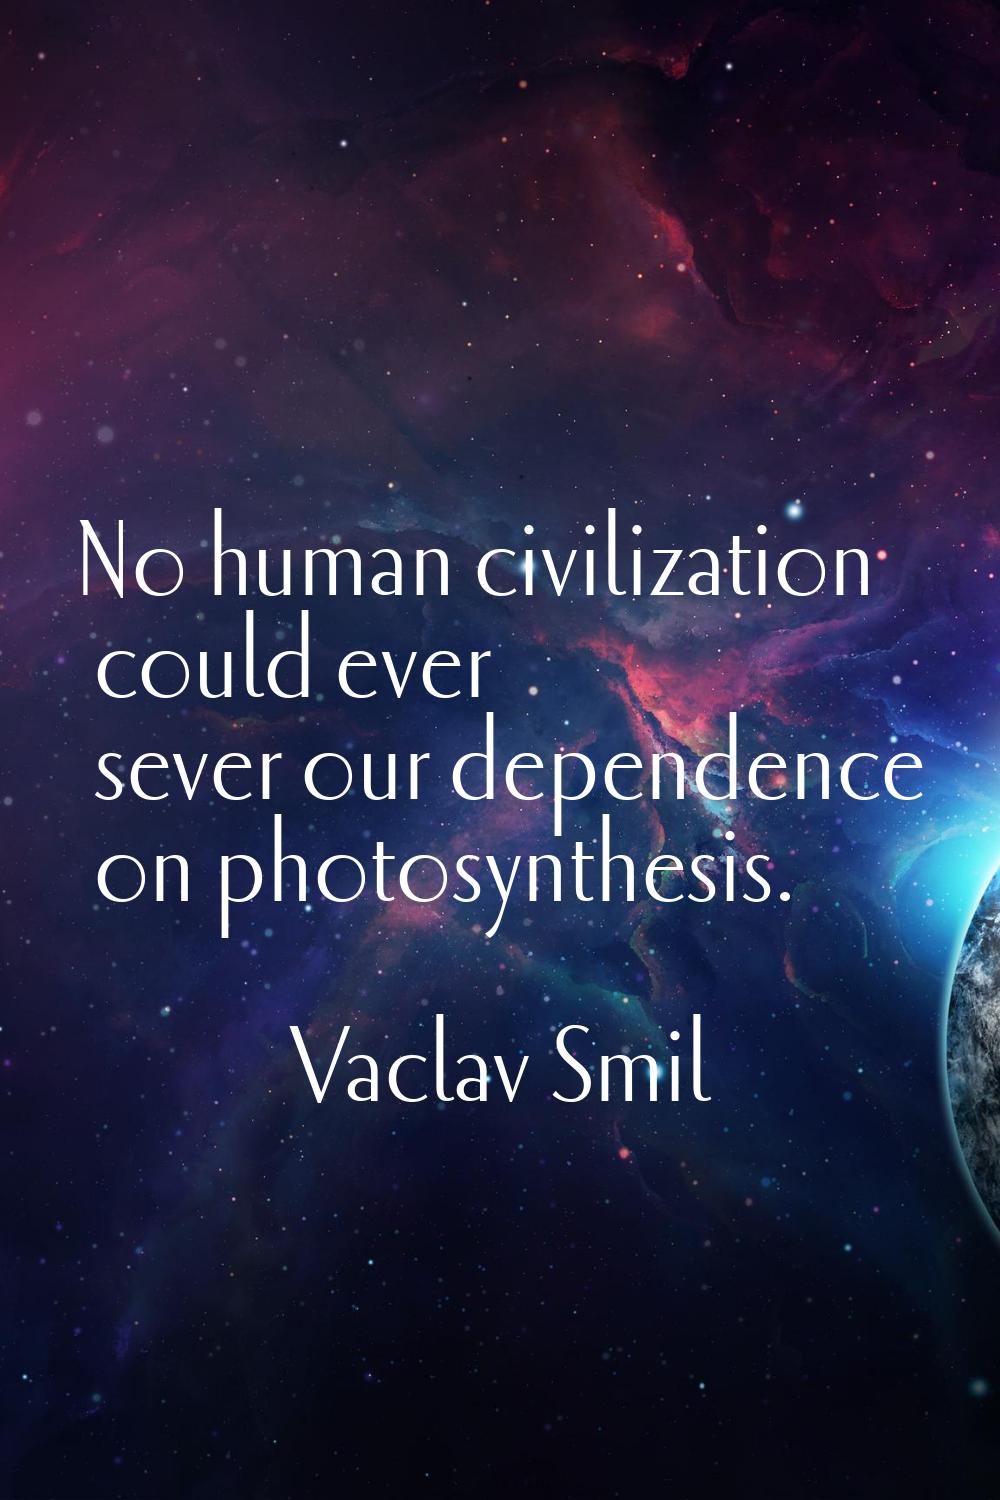 No human civilization could ever sever our dependence on photosynthesis.